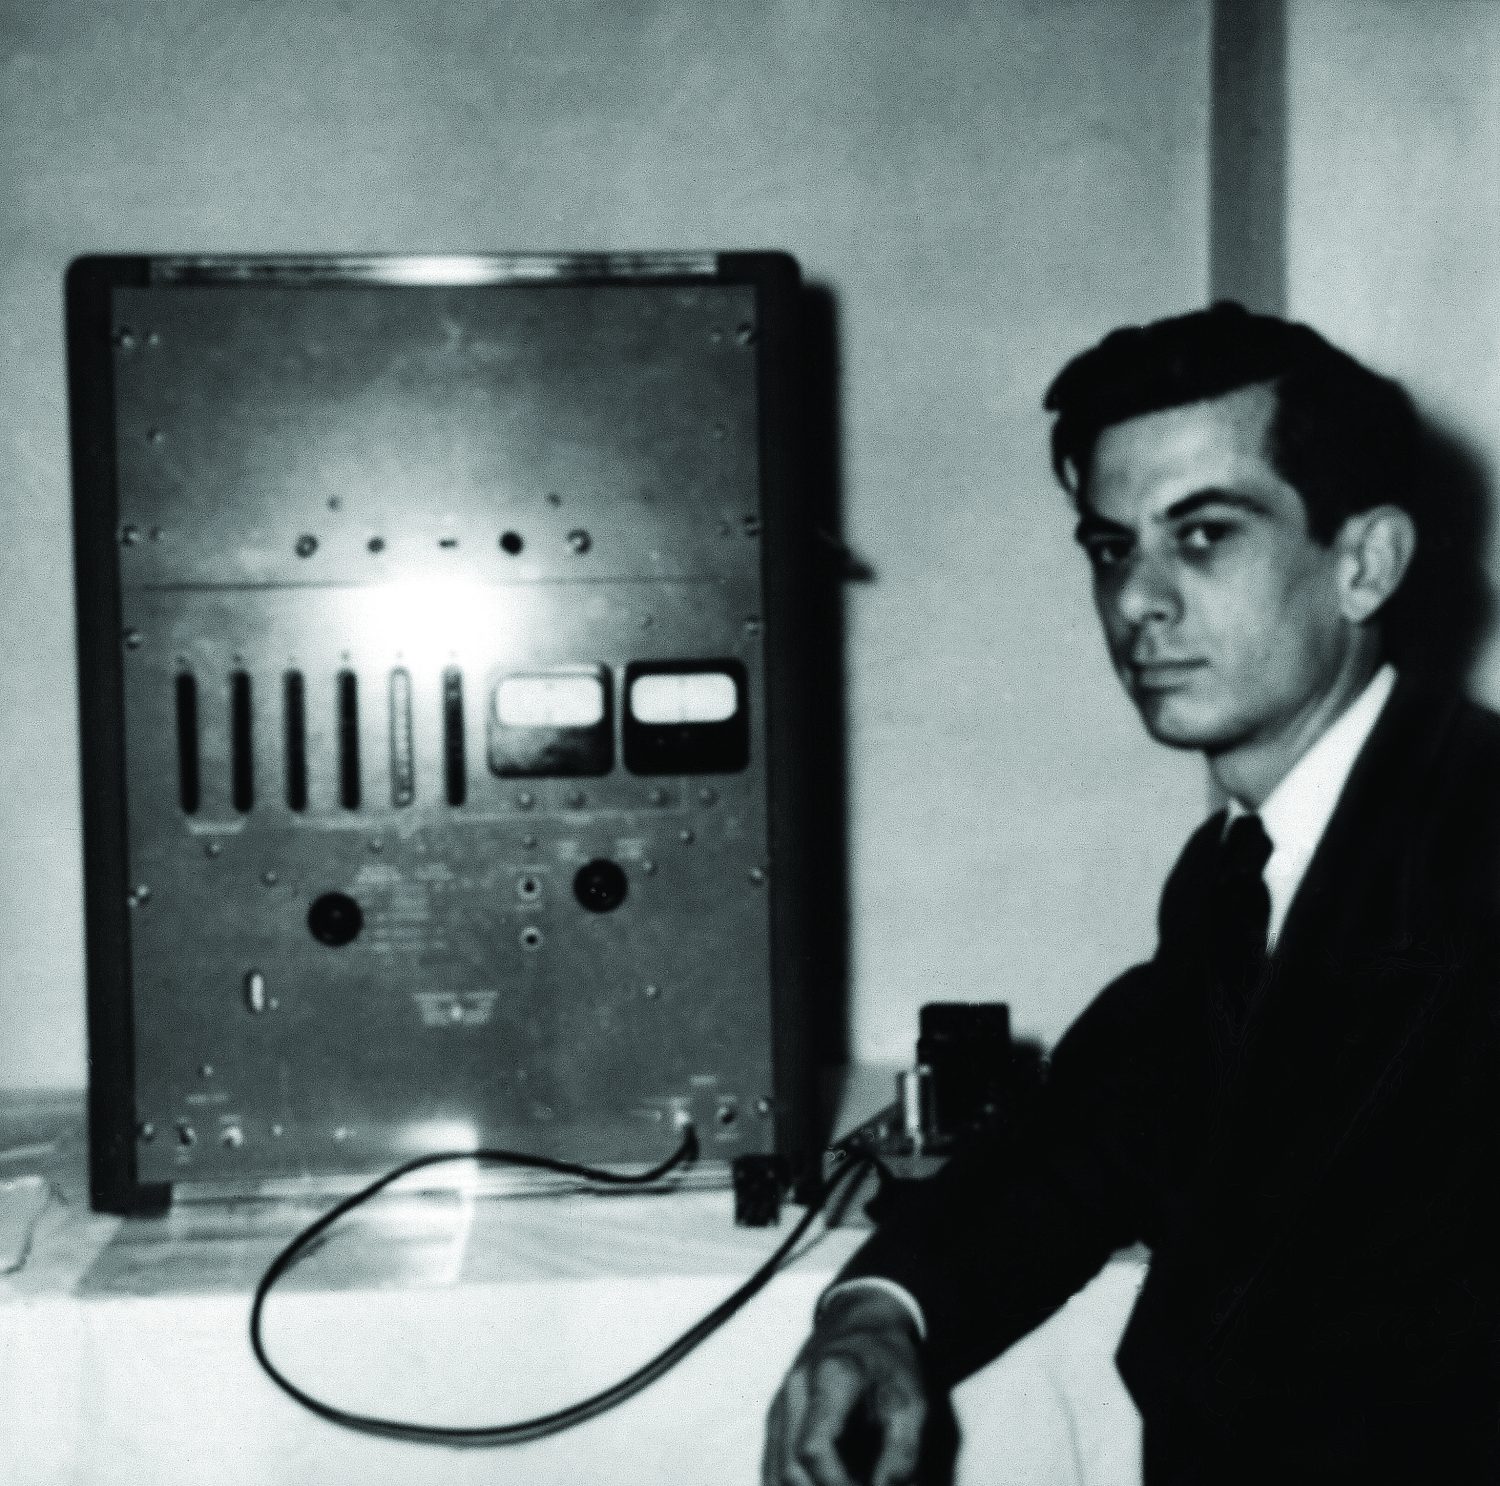 A man poses in front of the Hewlett-Packard 524A radio frequency counter.